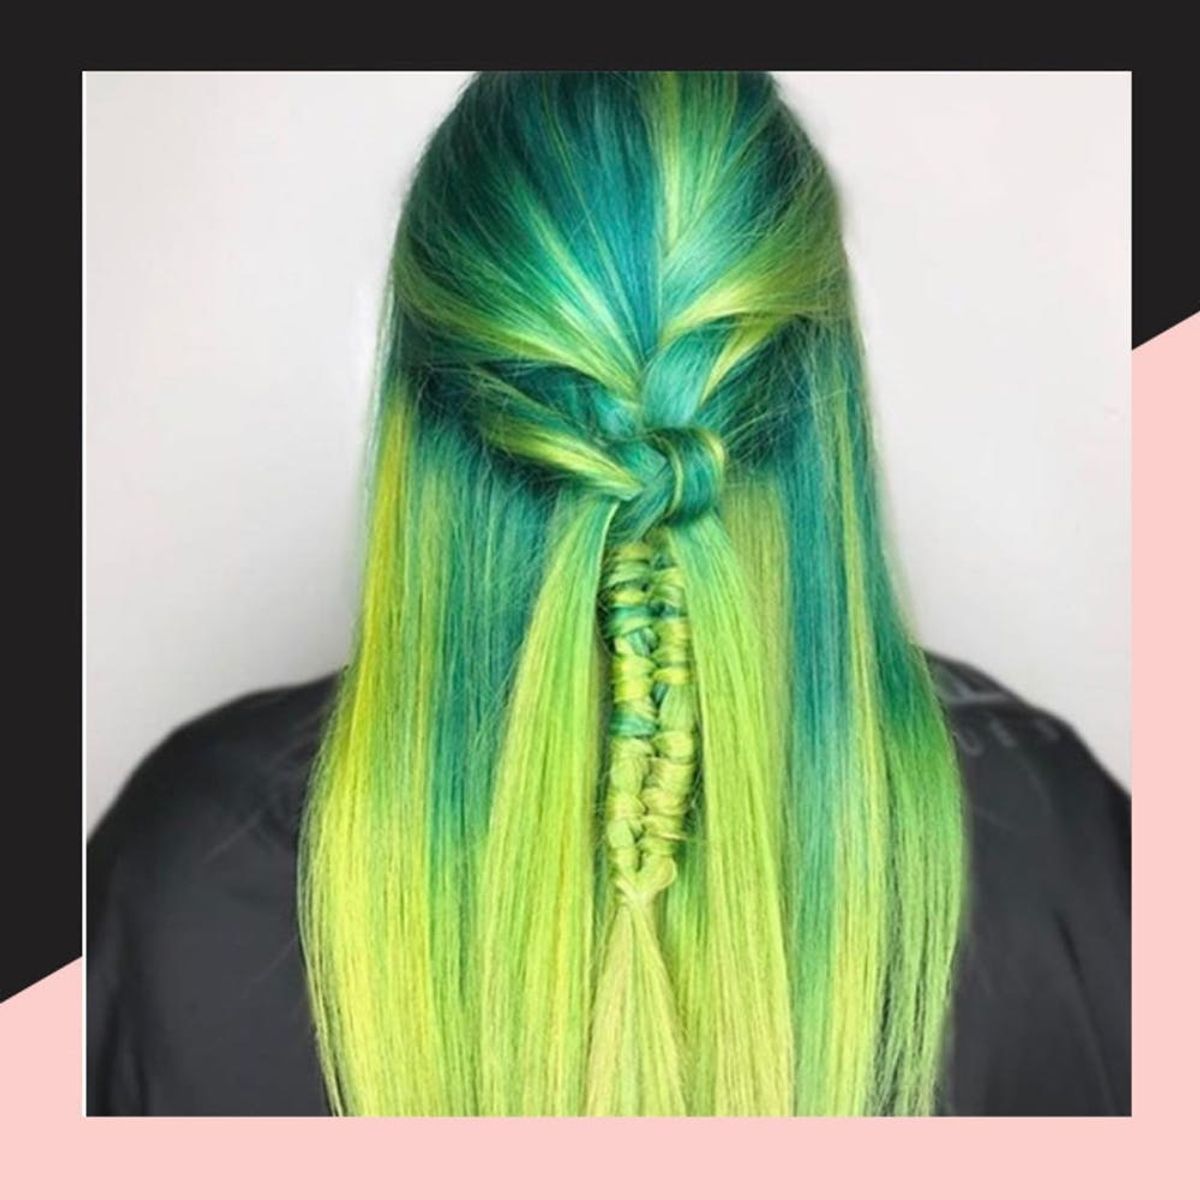 Slime Roots Are the Latest Instagram Hair Trend We’re Not Quite Sure We Need